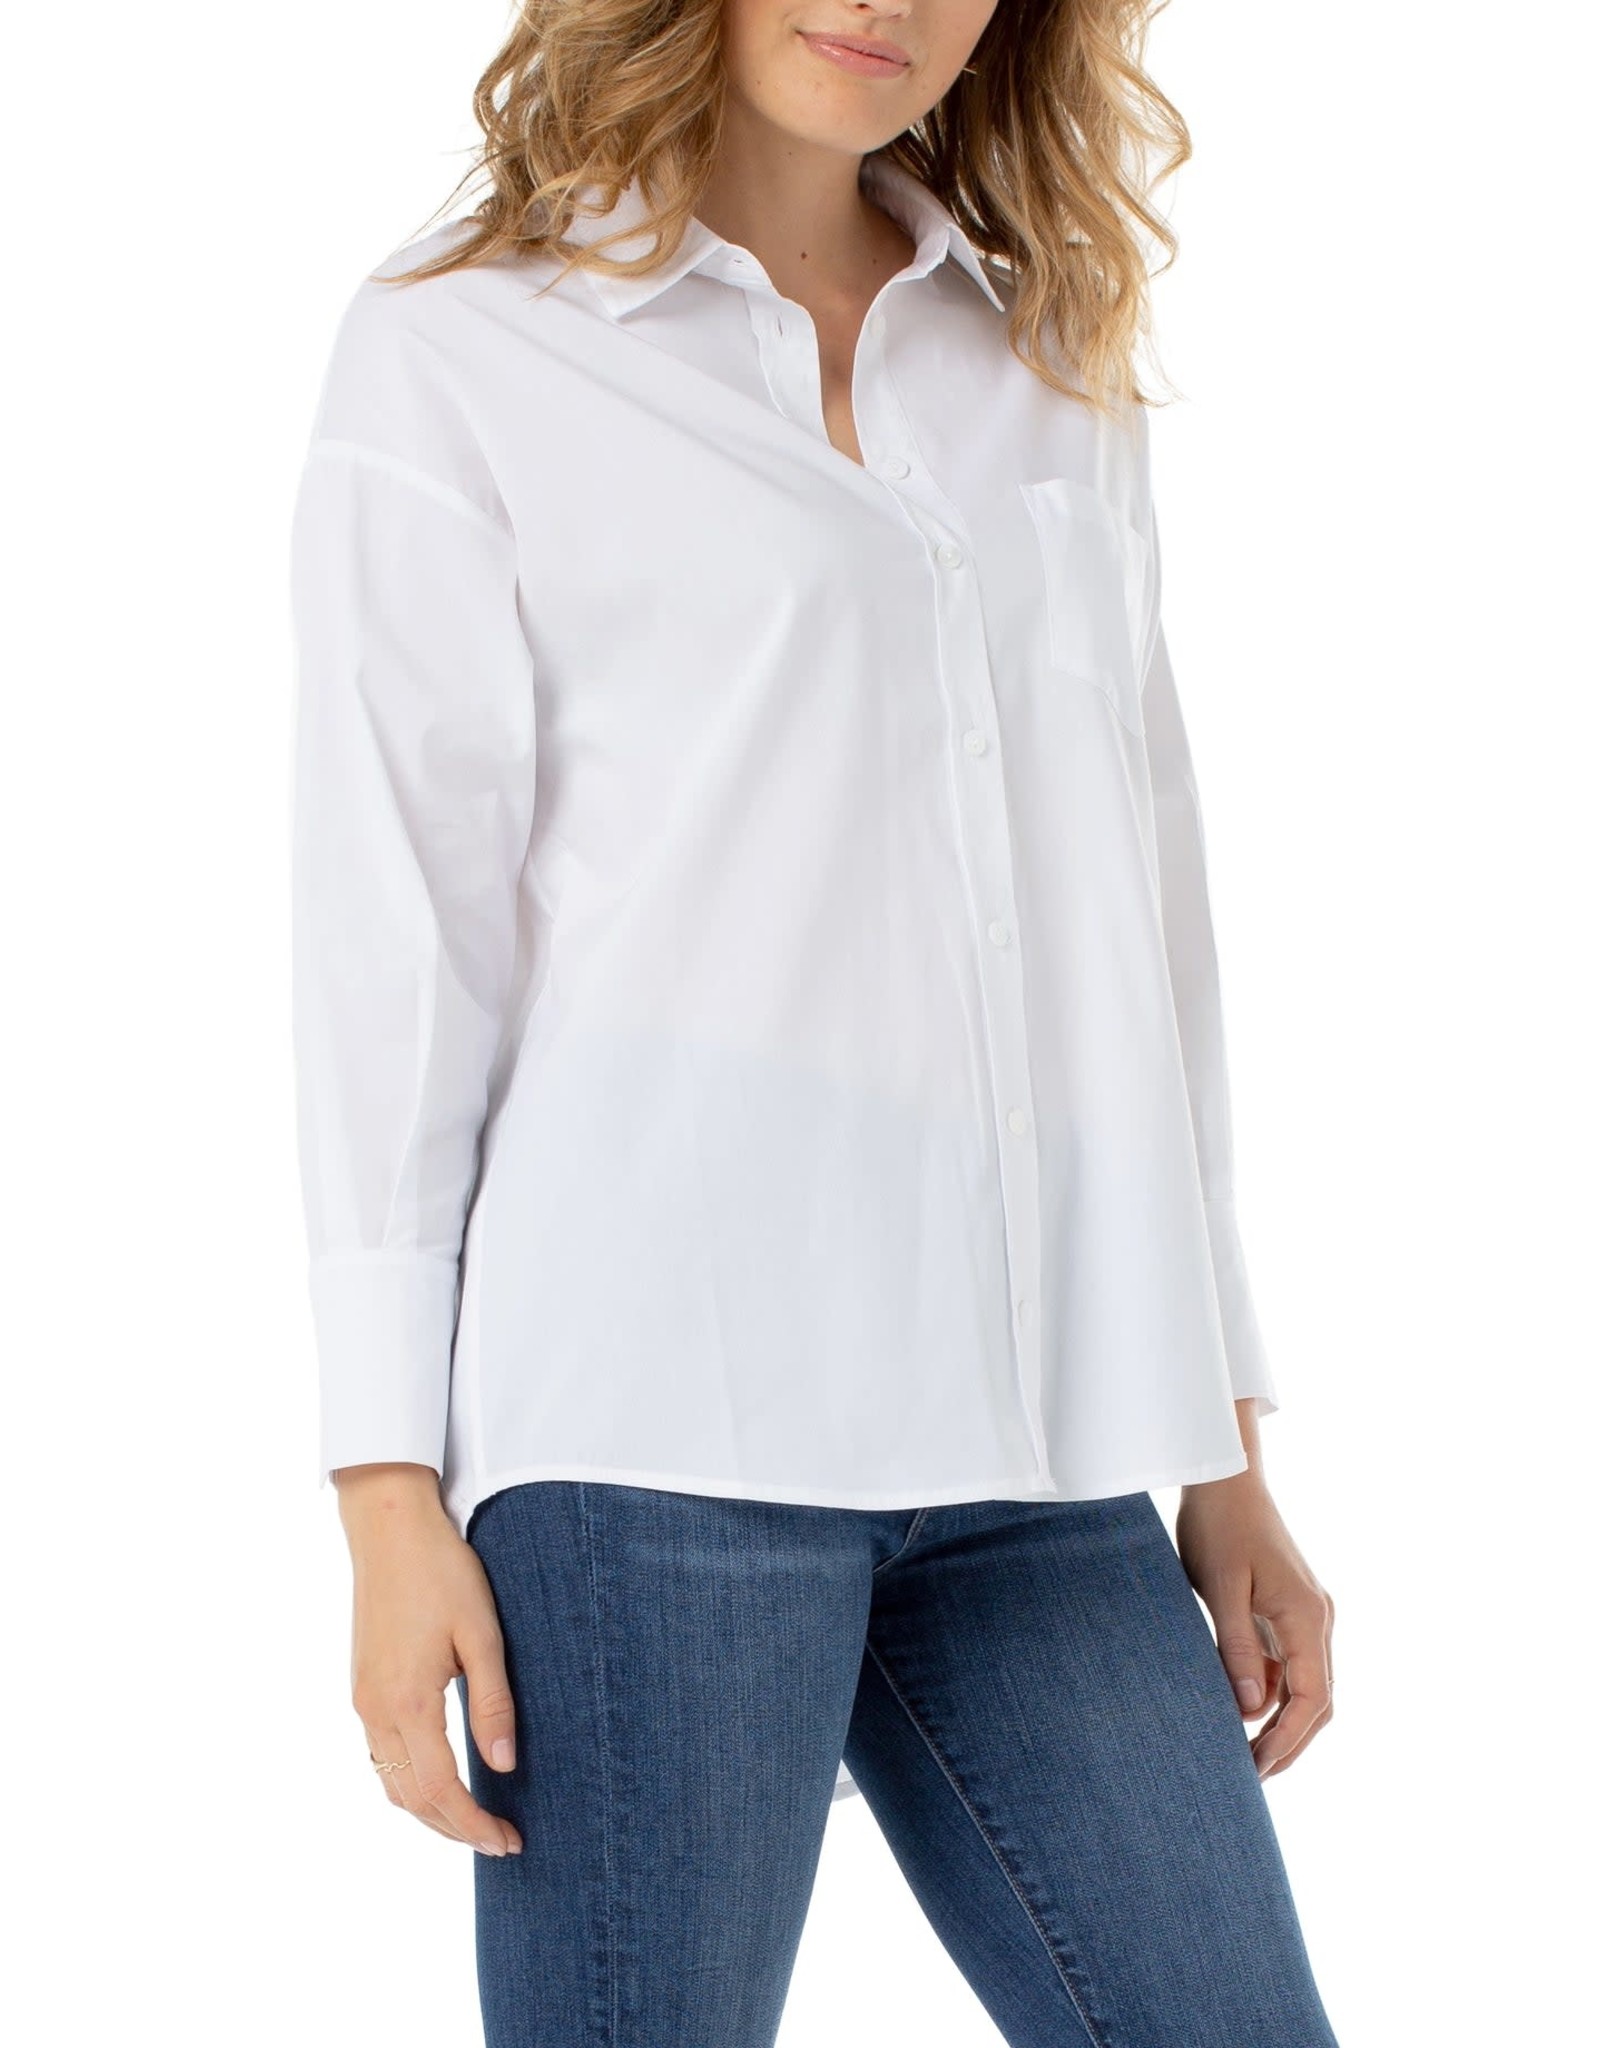 Liverpool Liverpool - Oversized Classic Button Down Shirt